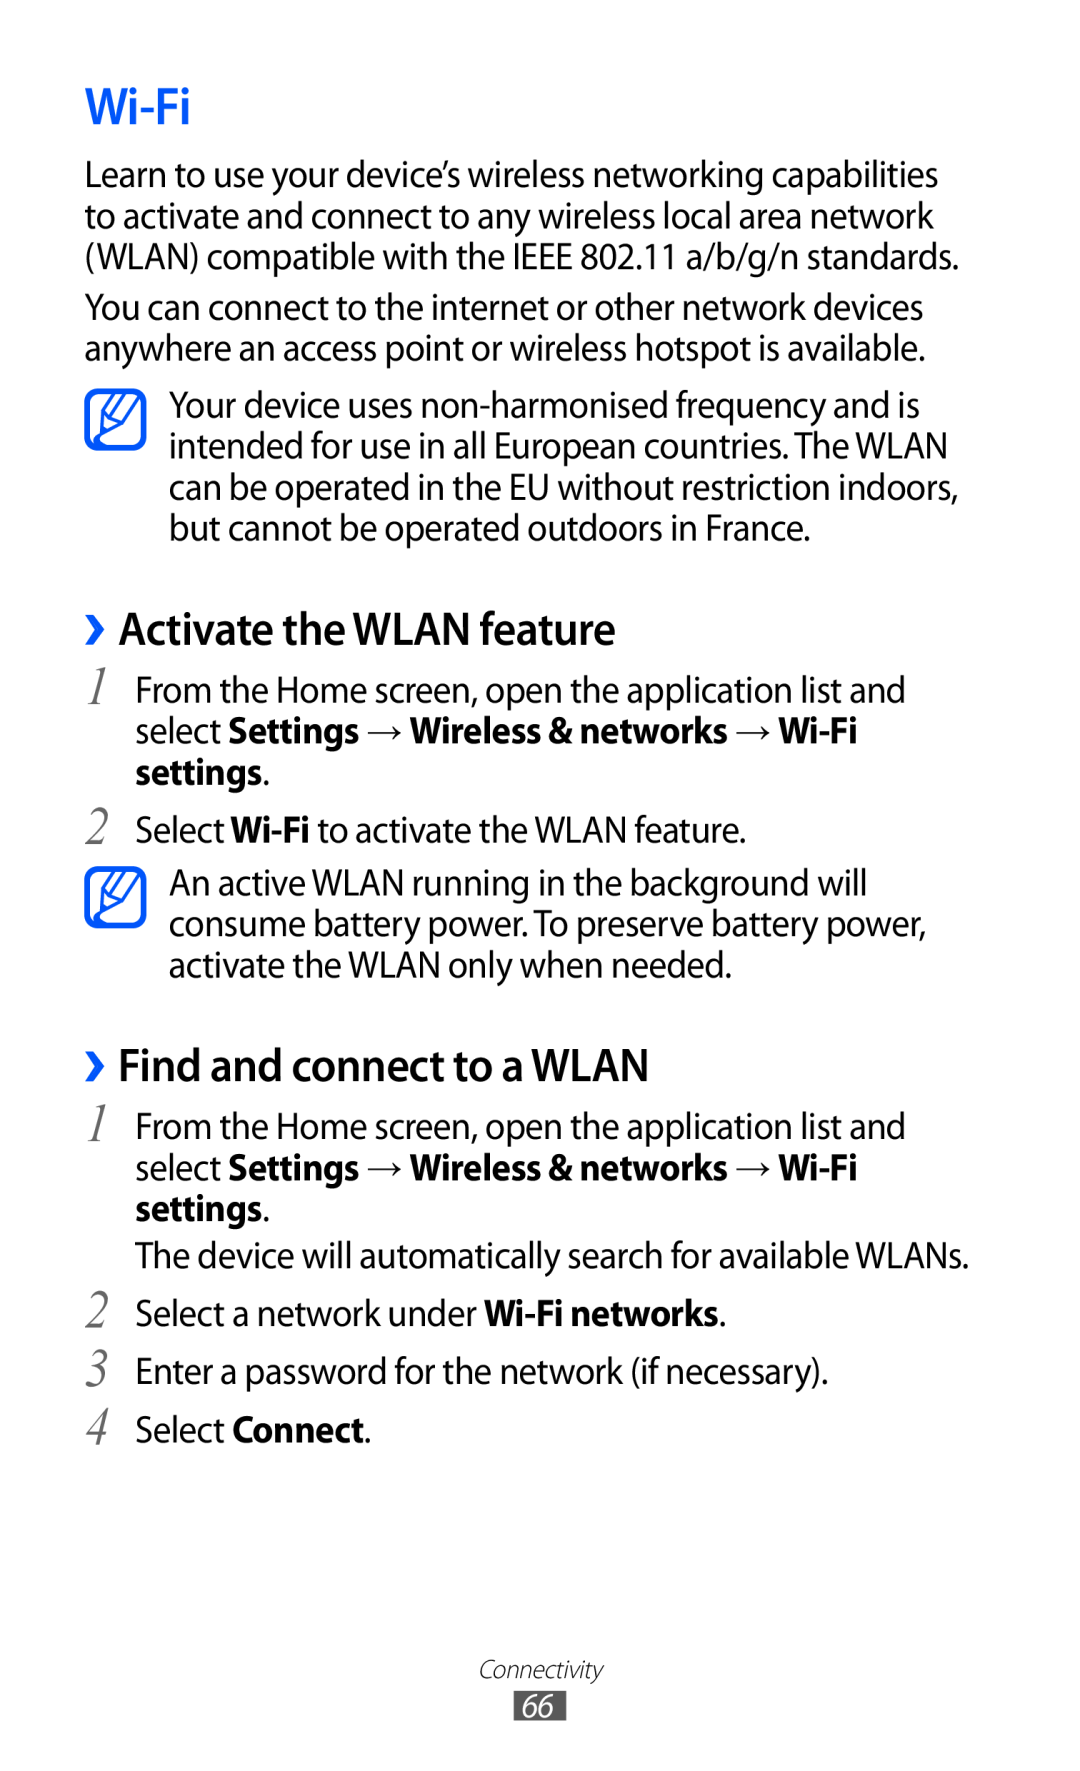 Samsung GT-P7510 user manual Wi-Fi, ››Activate the WLAN feature, ››Find and connect to a WLAN 